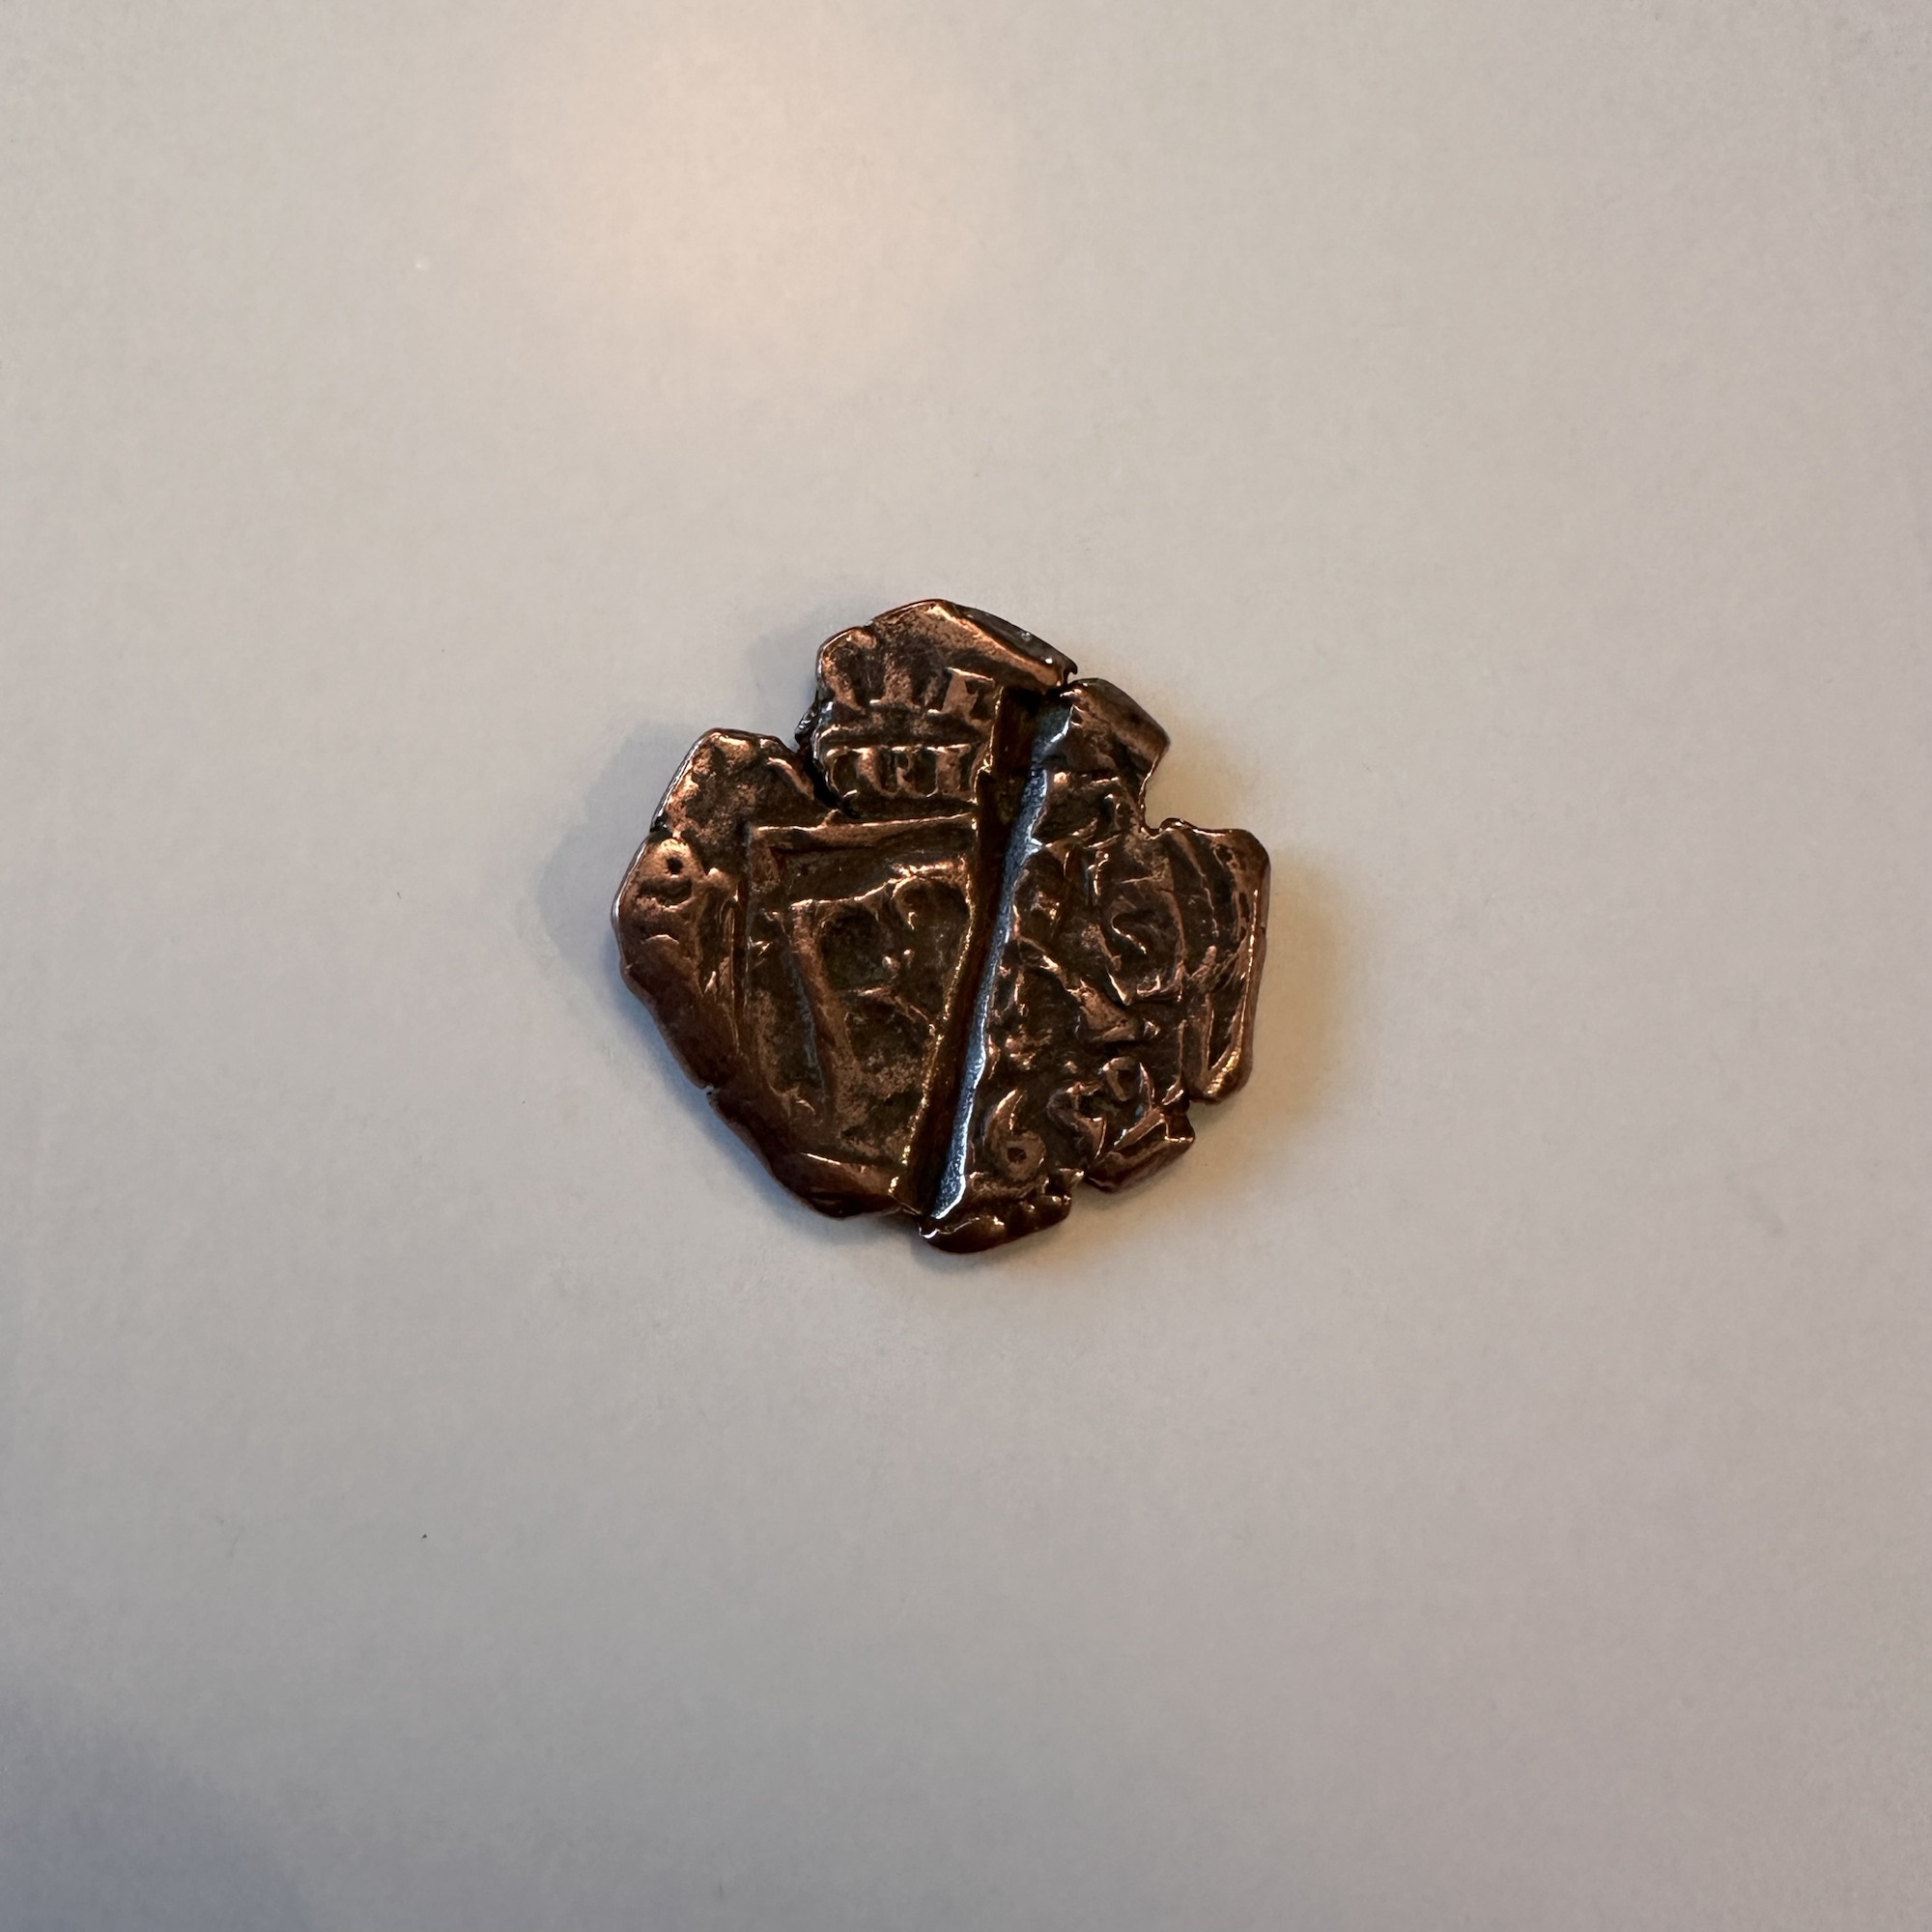 Spanish pirate cob coin. This coin has a score line where someone attempted to cut it probably for payment in the 17th century